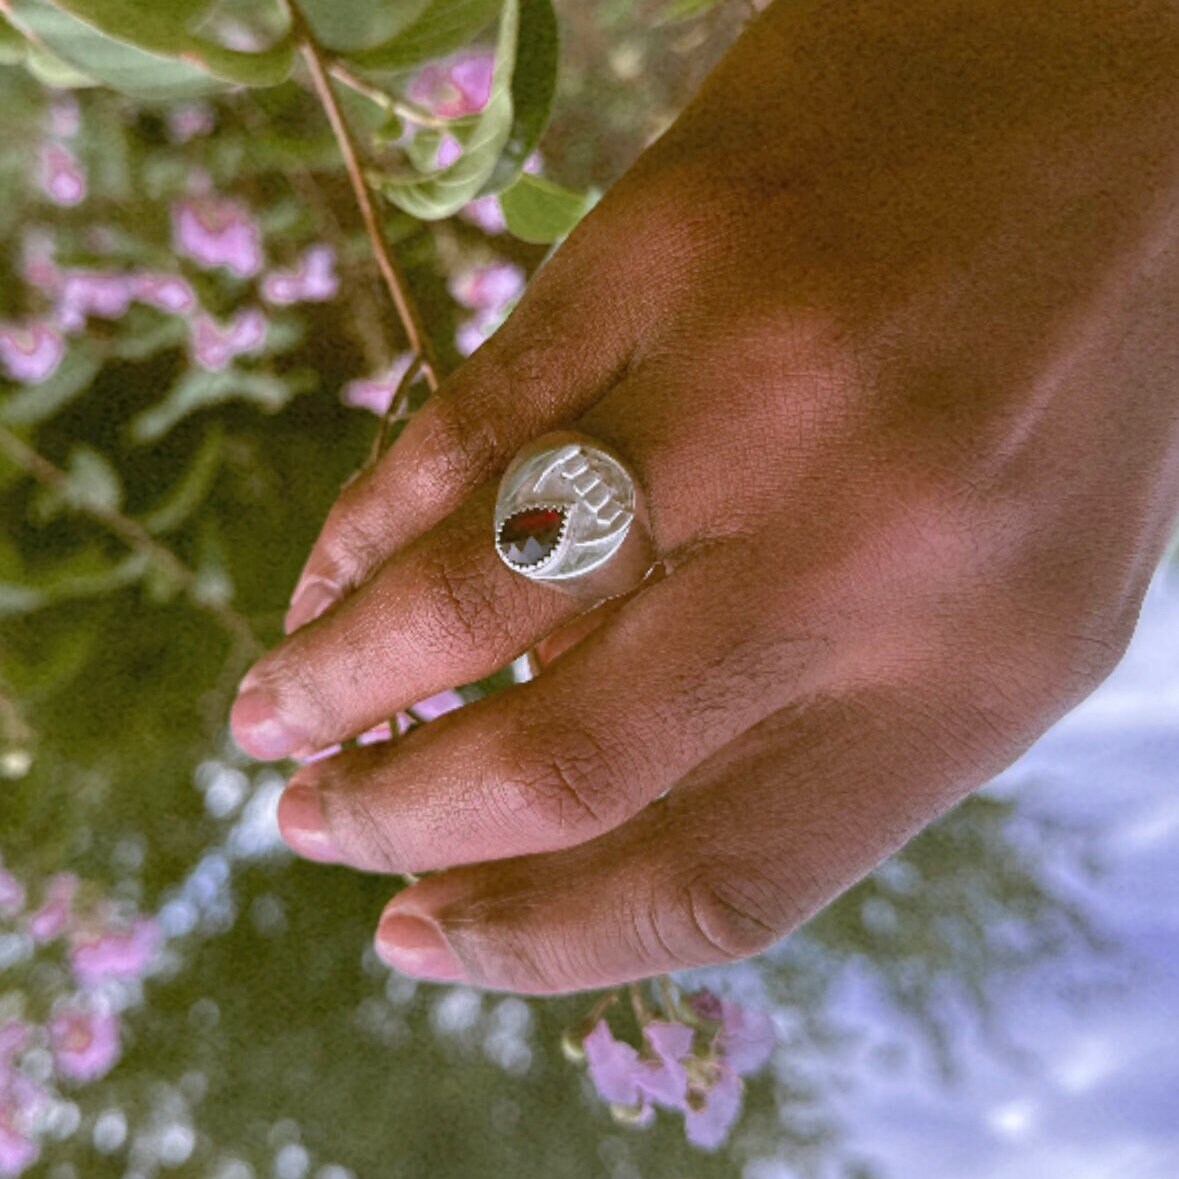 The Vamp Ring • Sterling Silver Signet Ring with Garnet.